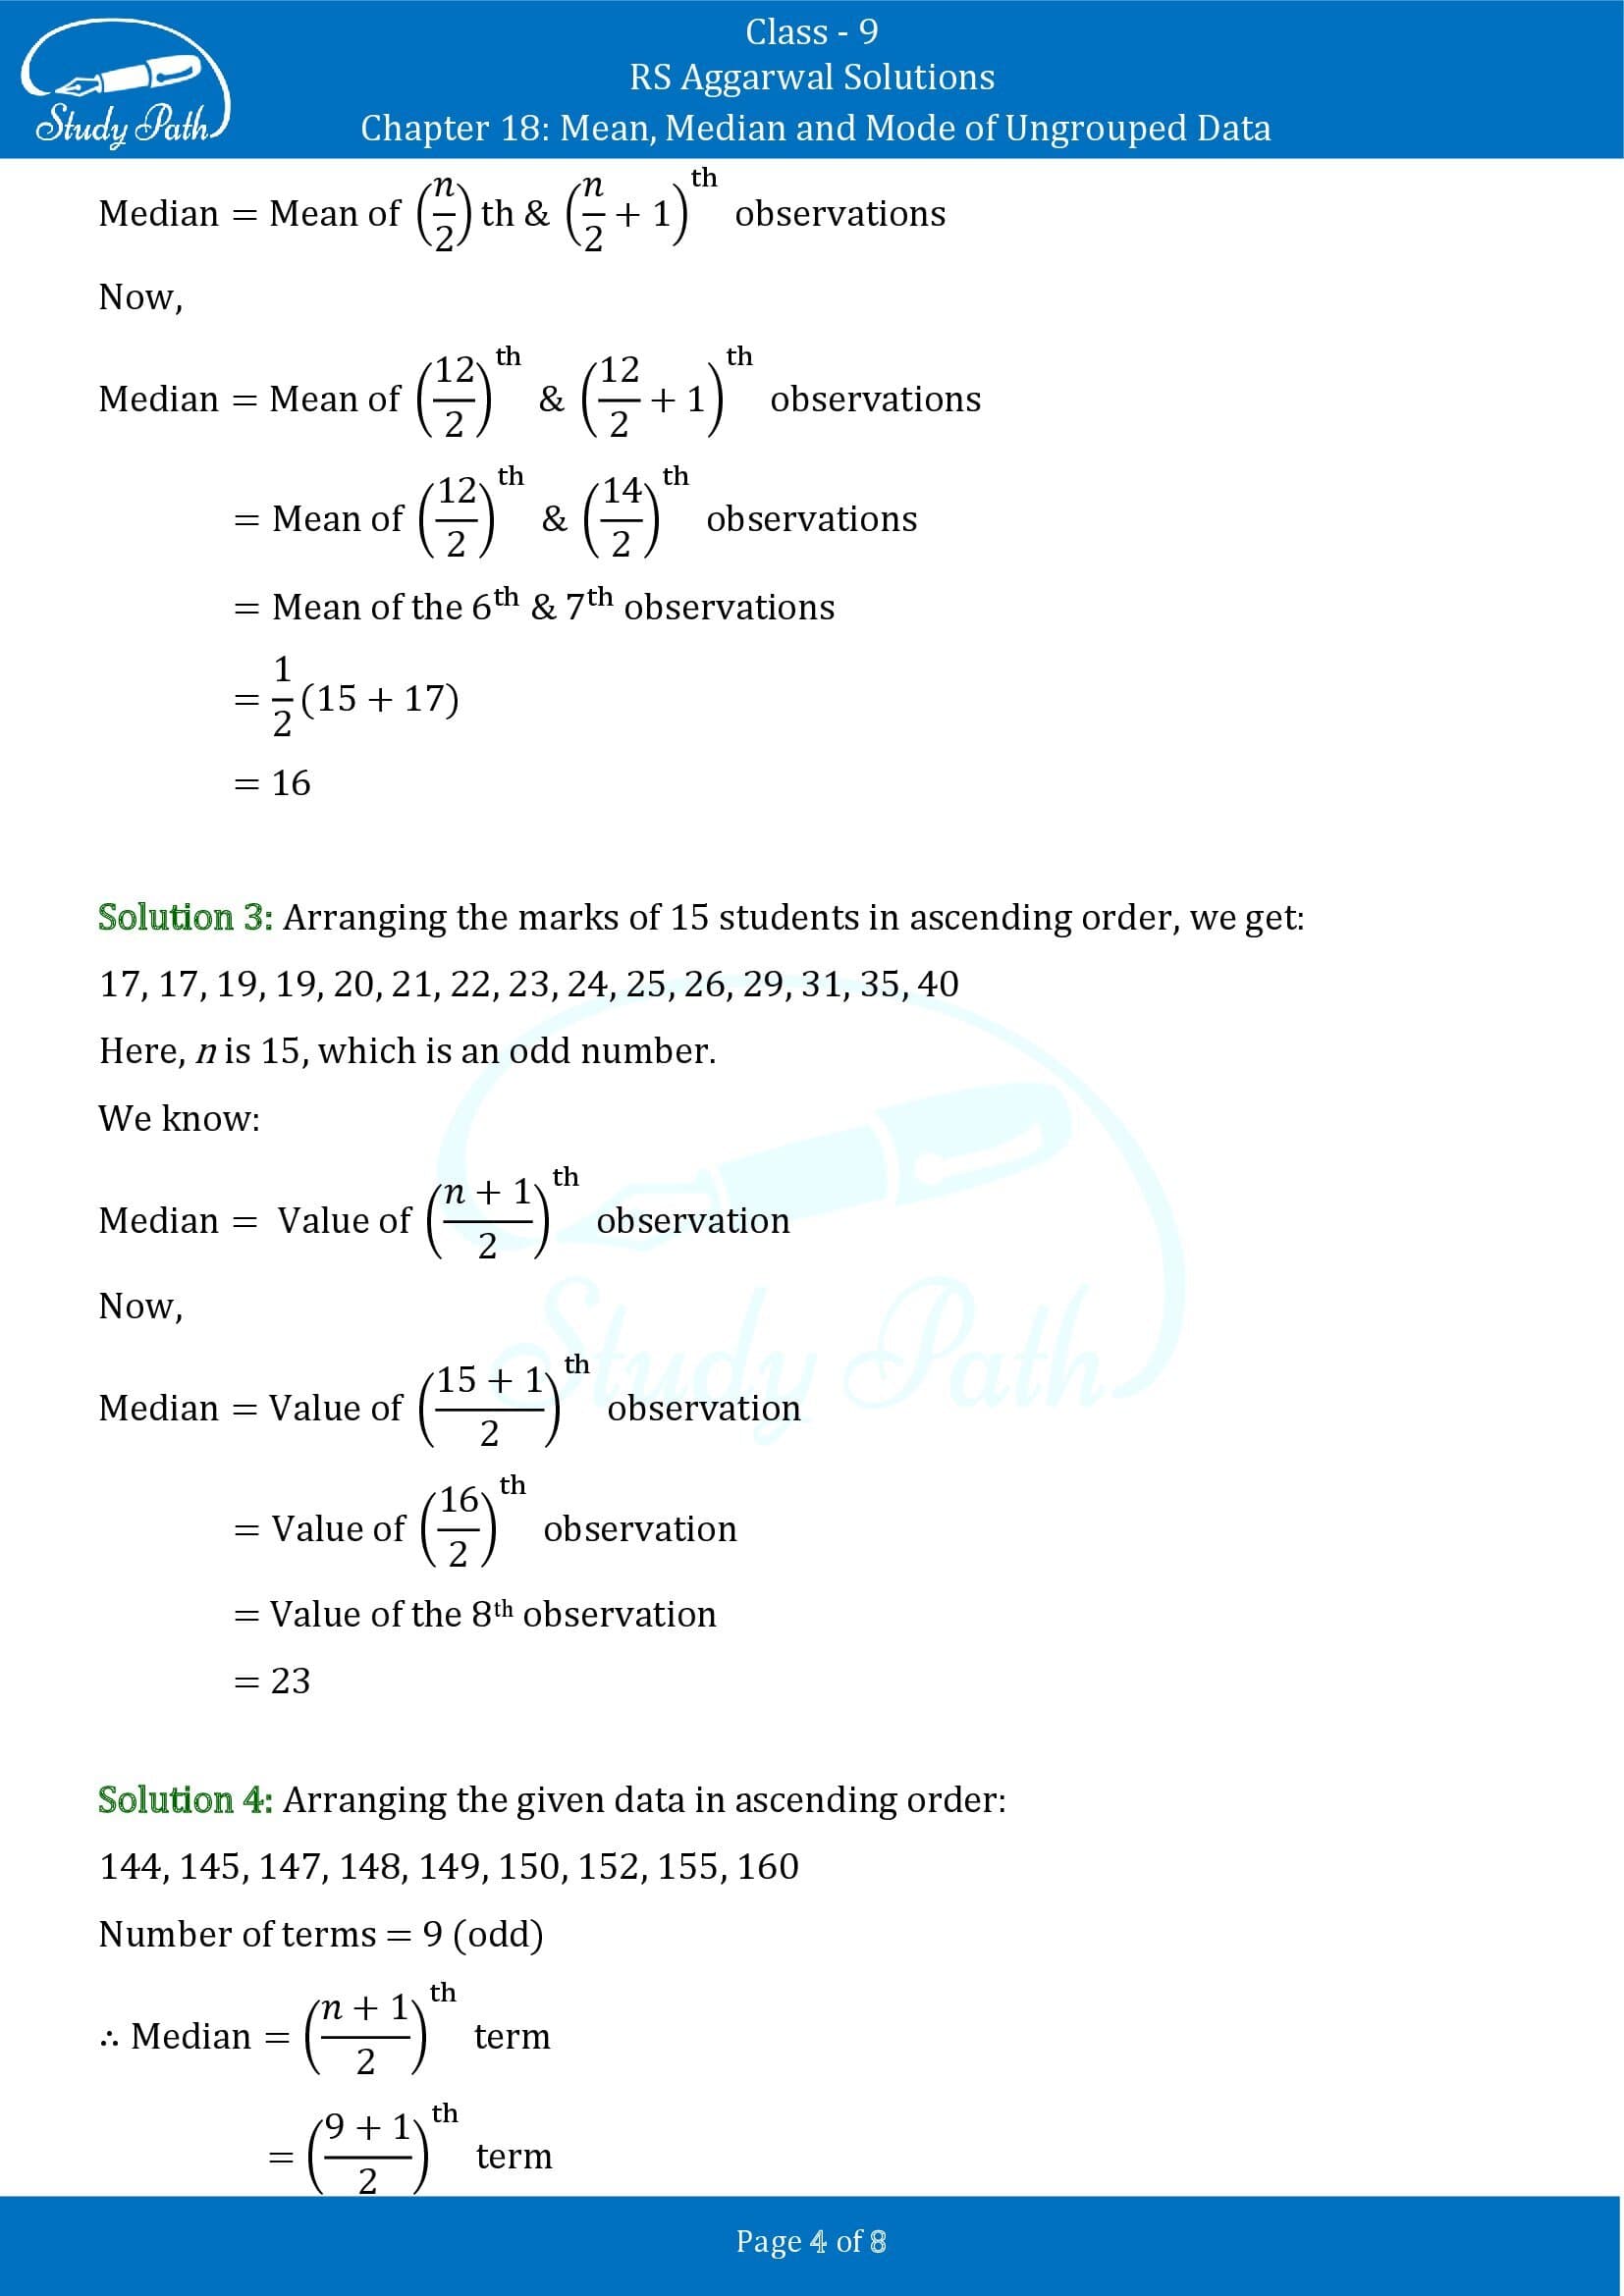 RS Aggarwal Solutions Class 9 Chapter 18 Mean Median and Mode of Ungrouped Data Exercise 18C 0004